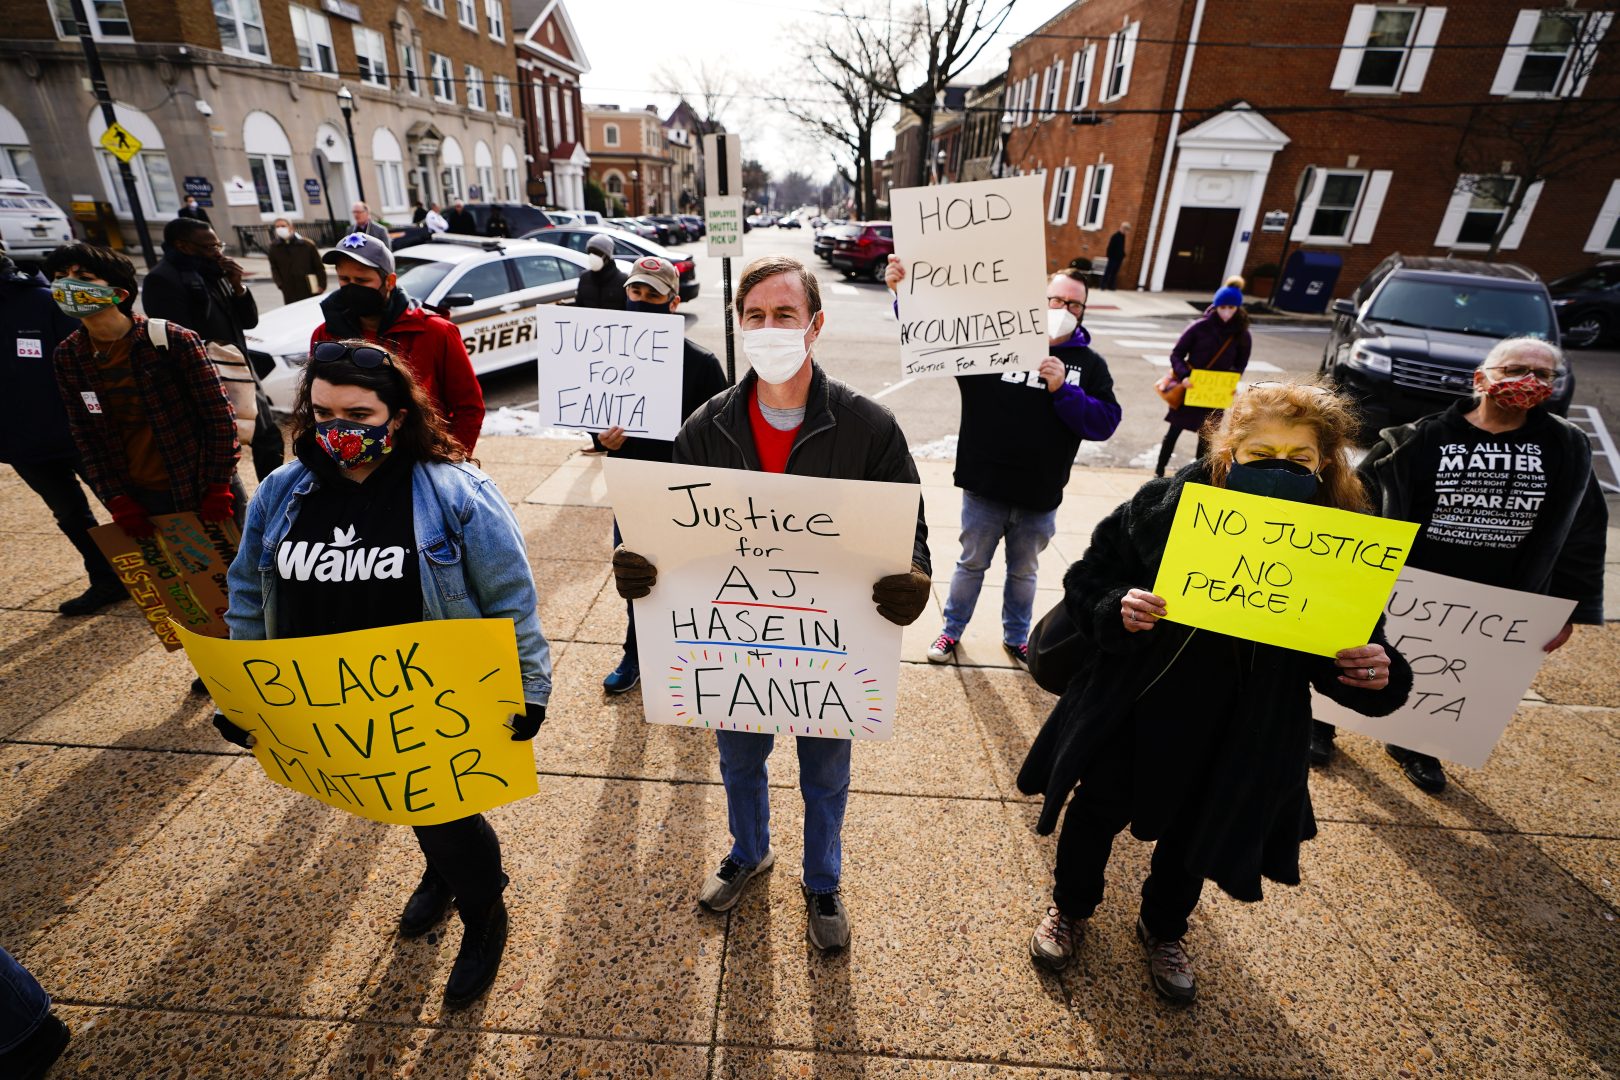 Protesters demonstrate calling for police accountability in the death of 8-year-old Fanta Bility who was shot outside a football game, at the Delaware County Courthouse in Media, Pa., Thursday, Jan. 13, 2022. Authorities say officers were responding to gunfire between two teens when Bility was fatally struck by a police bullet in 2021. 